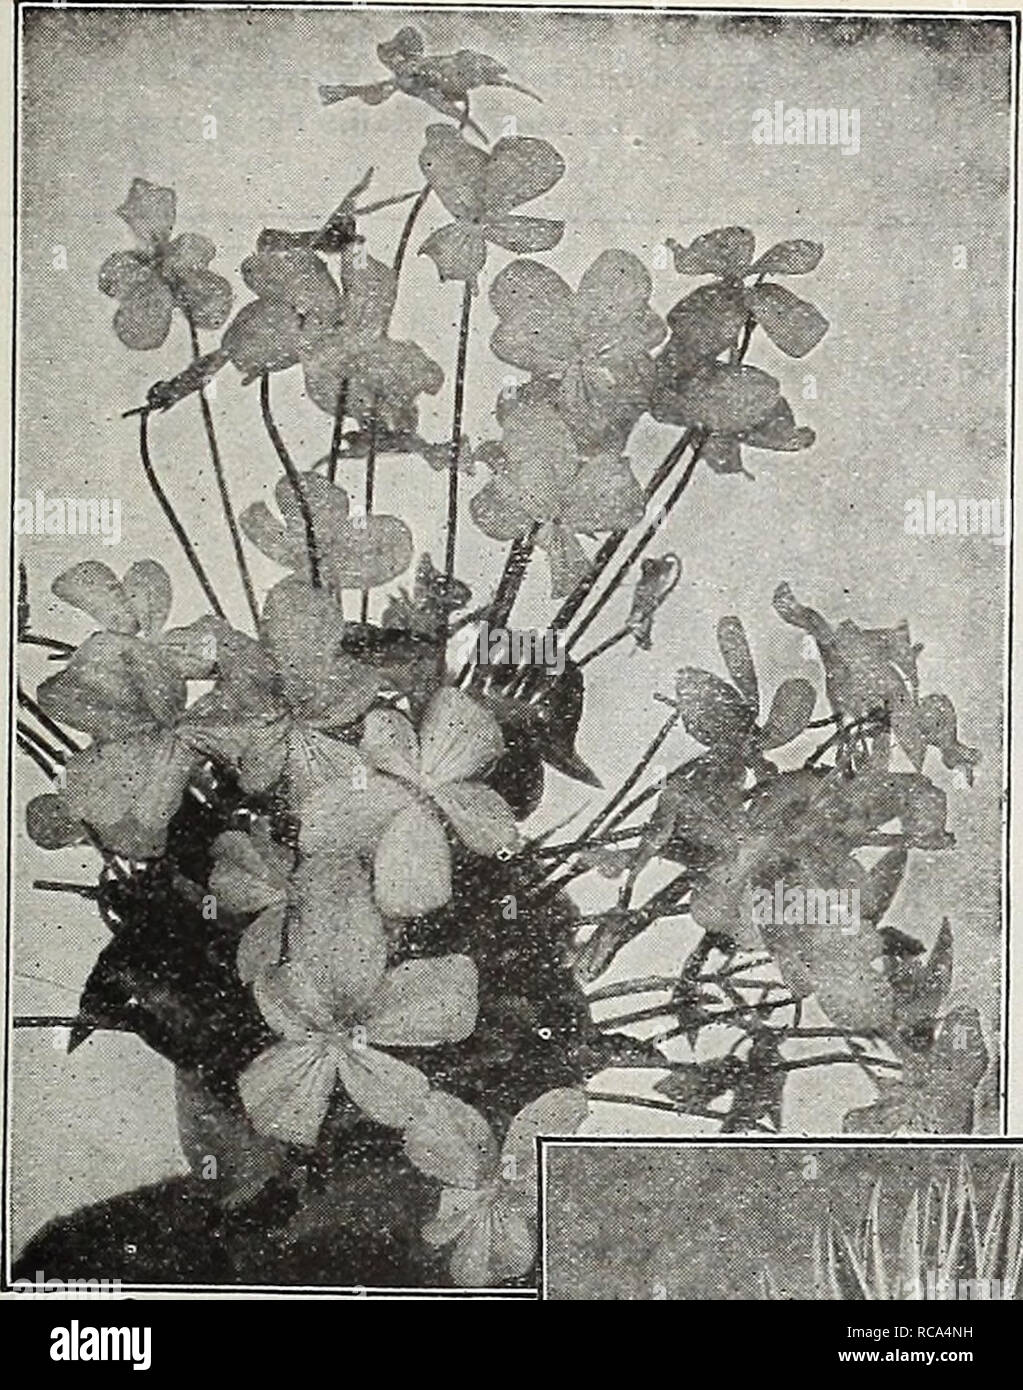 . Dreer's garden book 1918. Seeds Catalogs; Nursery stock Catalogs; Gardening Equipment and supplies Catalogs; Flowers Seeds Catalogs; Vegetables Seeds Catalogs; Fruit Seeds Catalogs. Bjjji PHILADELPHIA 1 IjpARDY PEREMIJIAL PbANn&quot;f|ffl 219. Viola Cornuta Purpurea Viola Cornuta Purpurea, or G. Wermig A variety of the tufted Pansy, forming clumps that are a sheet of bloom the entire season, and a most attractive subject for the border; the flowers, which in general appearance closely resemble the Prin- cess of Wales Violet, make it a splendid substitute for the latter during the sum- mer m Stock Photo